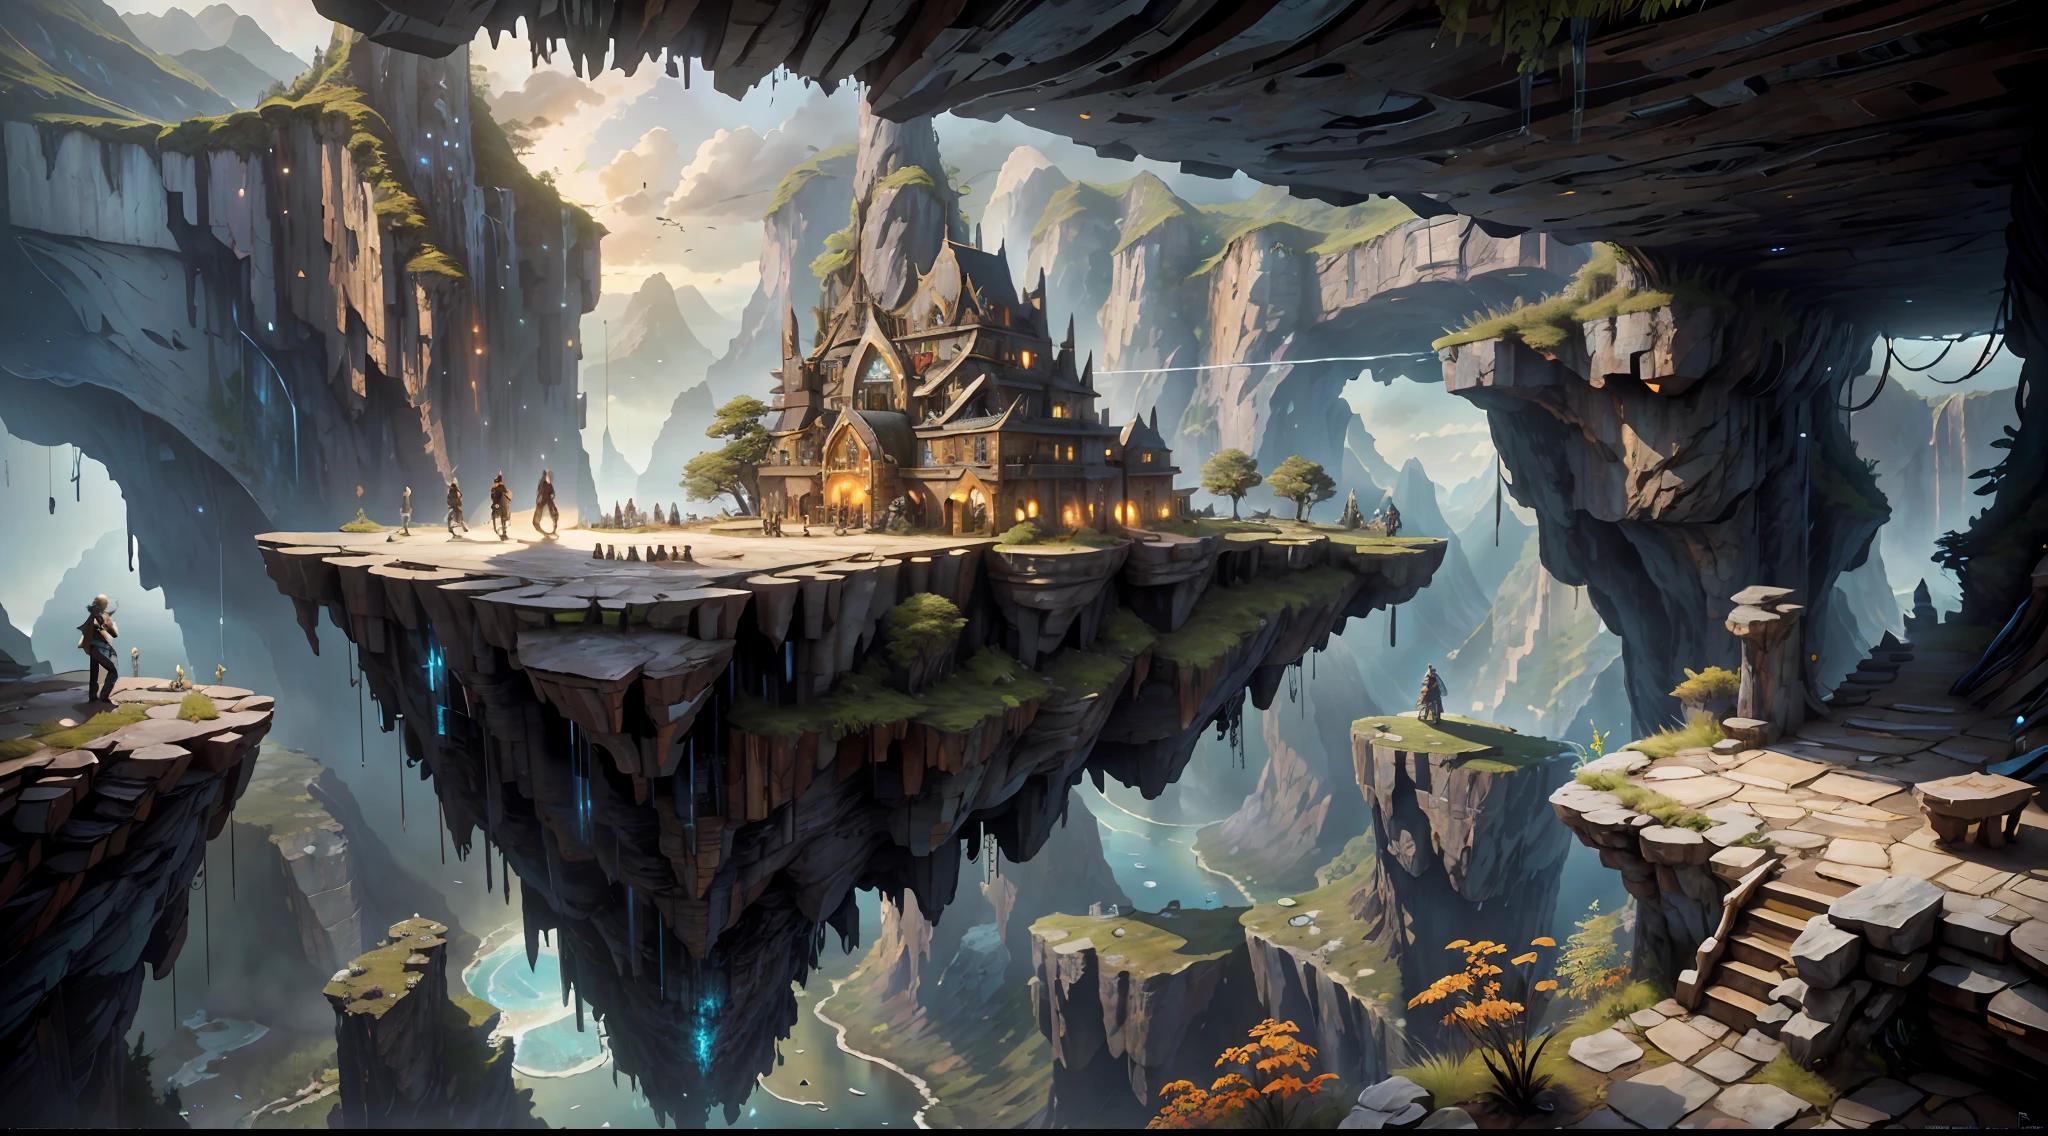 Movie, Relaxation Concept Art, Very Detailed Multiplayer Scene Interactivity, (Man), Woman, Beautiful Artwork Illustration, Detailed Landscape, Highly Detailed Scene, Environmental Design Illustration, Nature, Center Epic Building, Warmth, Night Glow, Original, HDR, (Cliff, Waterfall, Abyss, Rock, Cliff Edge House:1.3), Movie, Slate Grey, Dramatic Light, Architecture, Man Woman, Post-Impressionism, Key Vision, Biophilic Tanzania Bridge, At Twilight, Hair Light, Hearthstone artwork, Unreal Engine